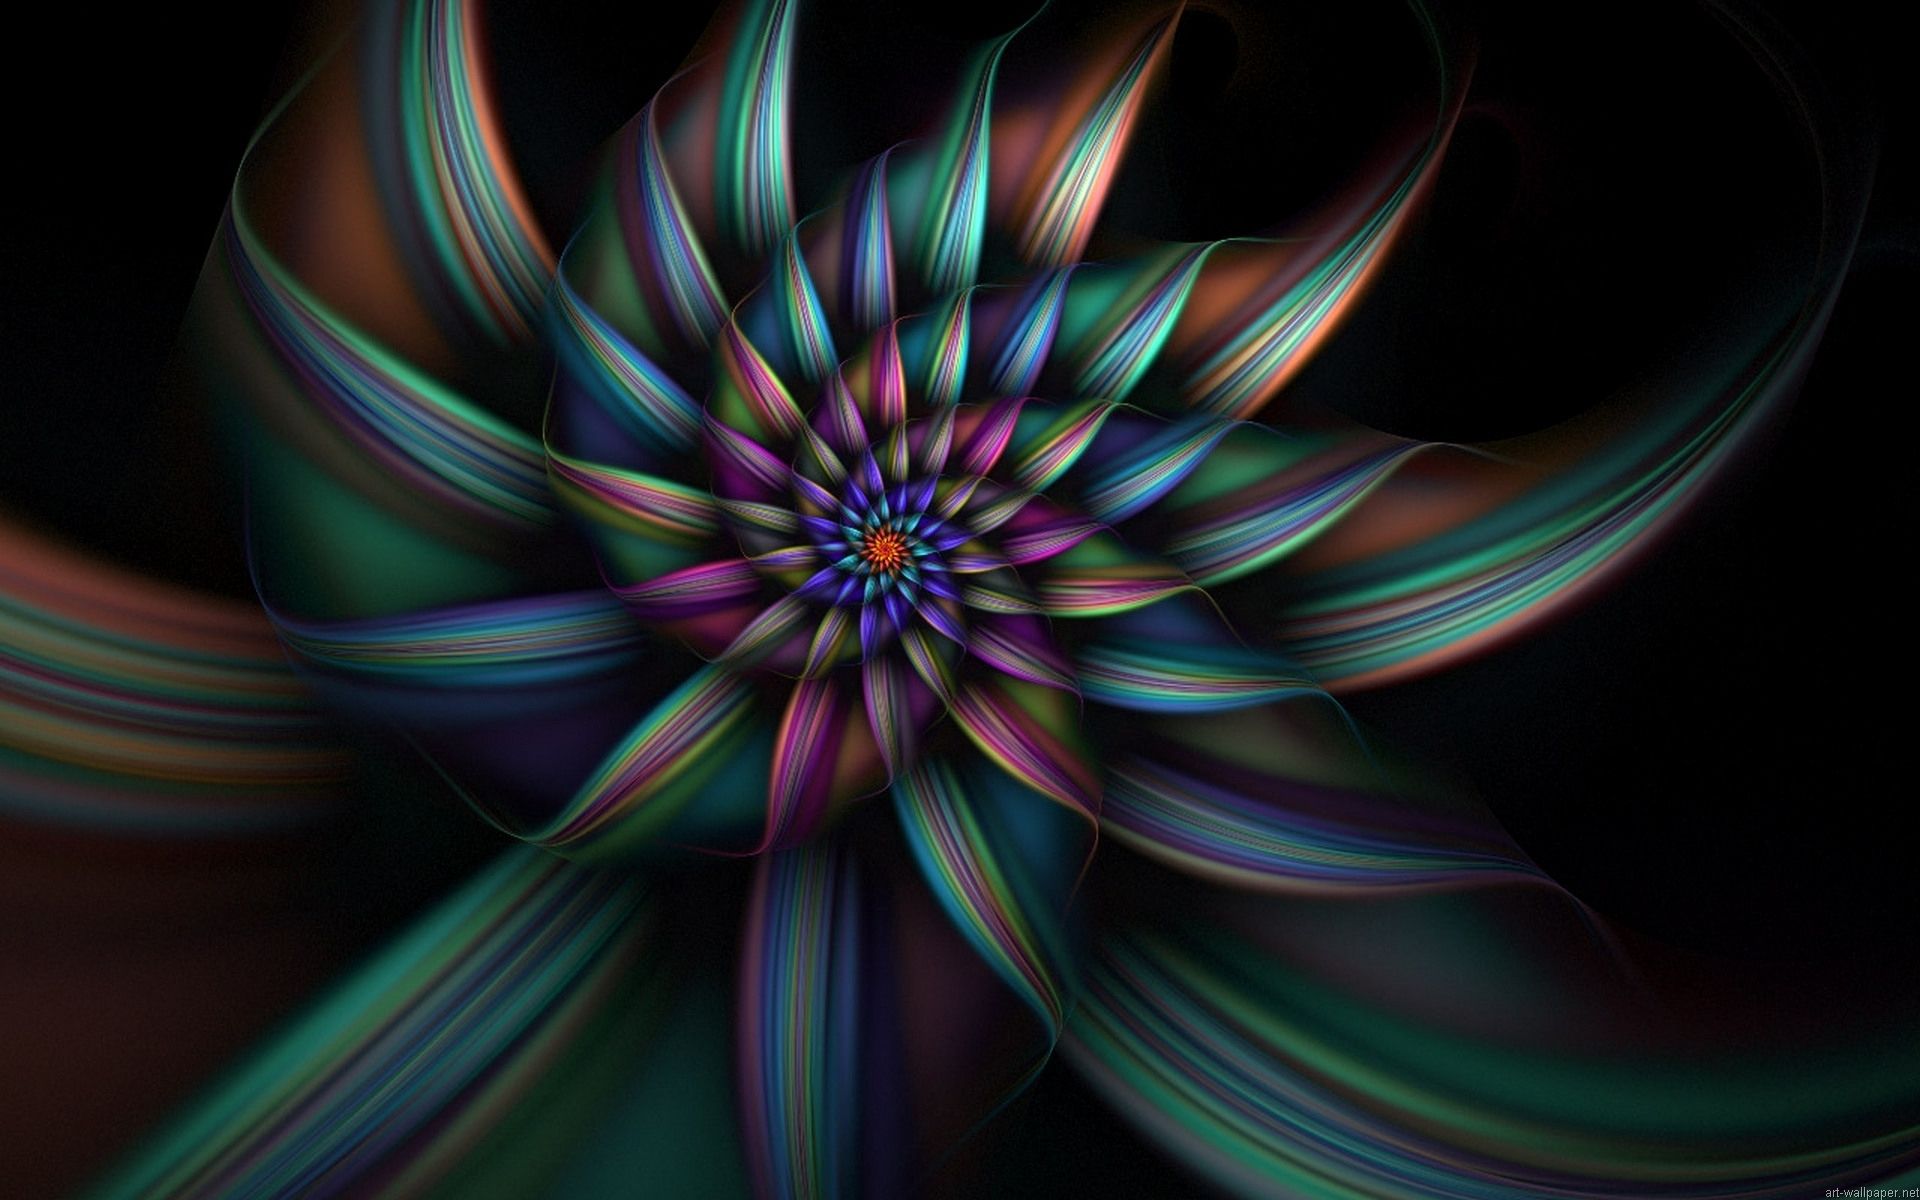 HD Abstract Image and Wallpaper for Mac, PC